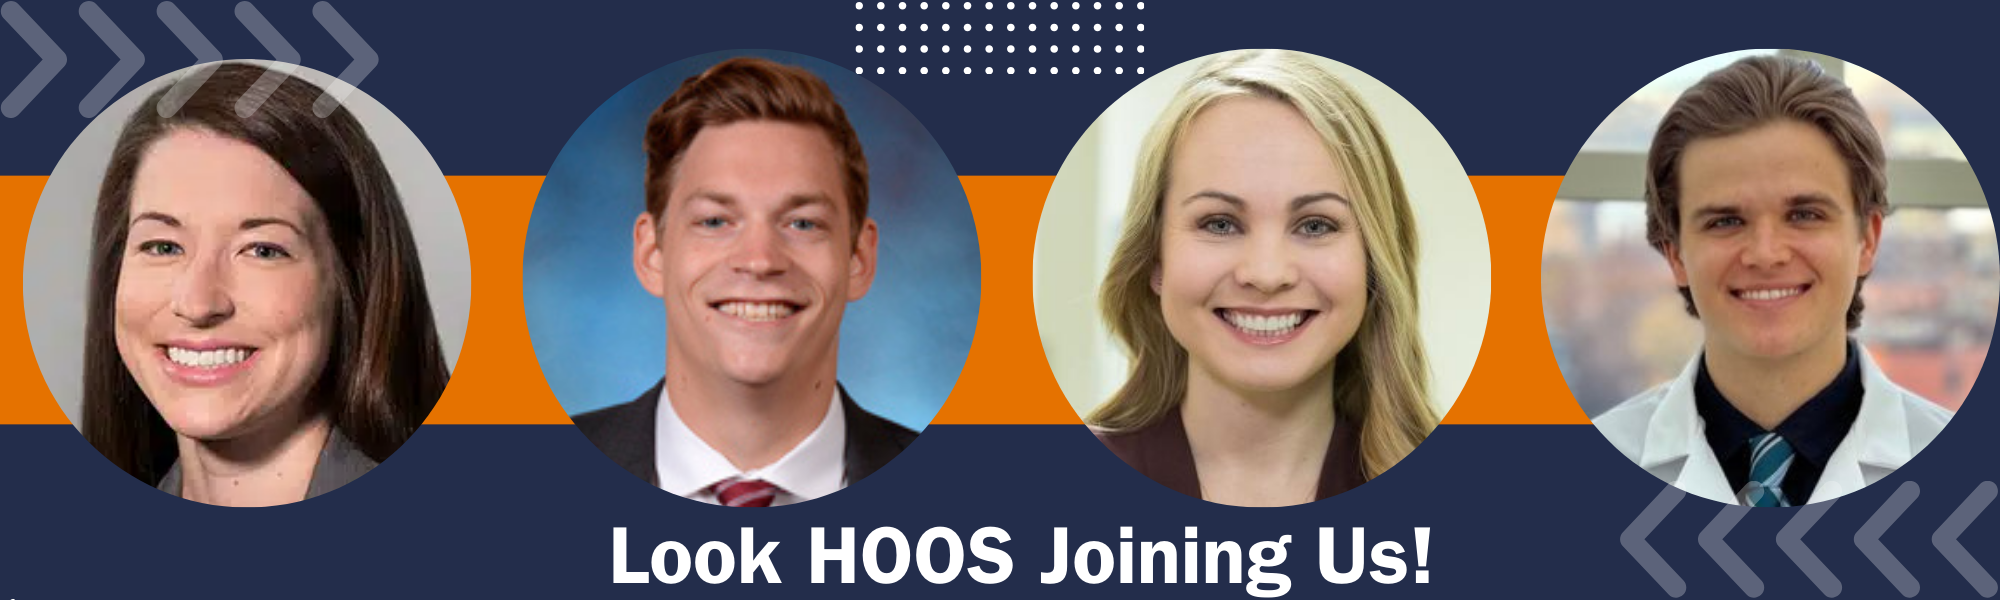 Look HOOS Joining Us! Banner featuring four new hires